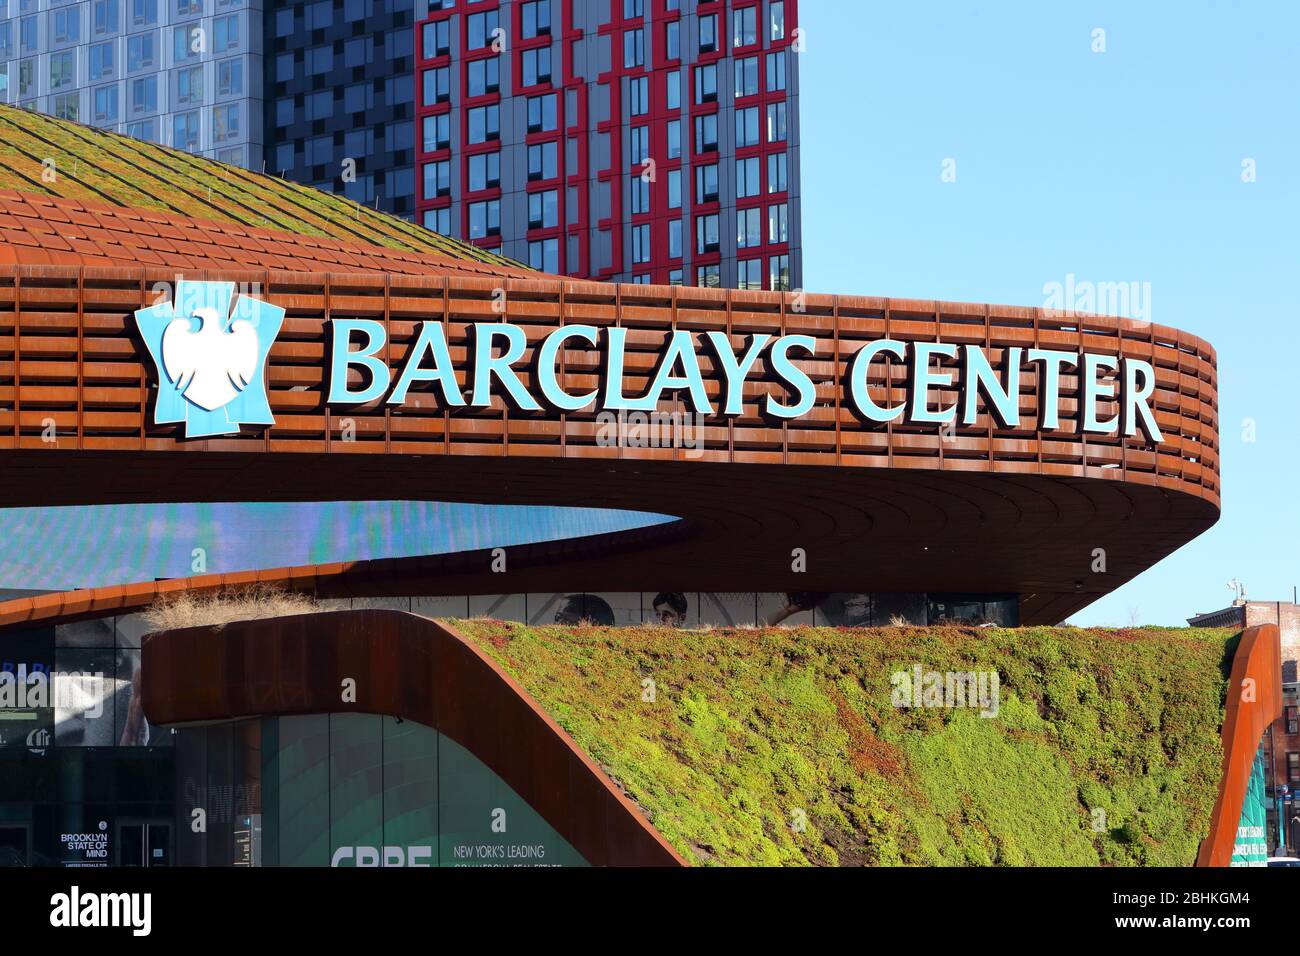 The green roof detail of Barclays Center, Brooklyn, New York. Stock Photo